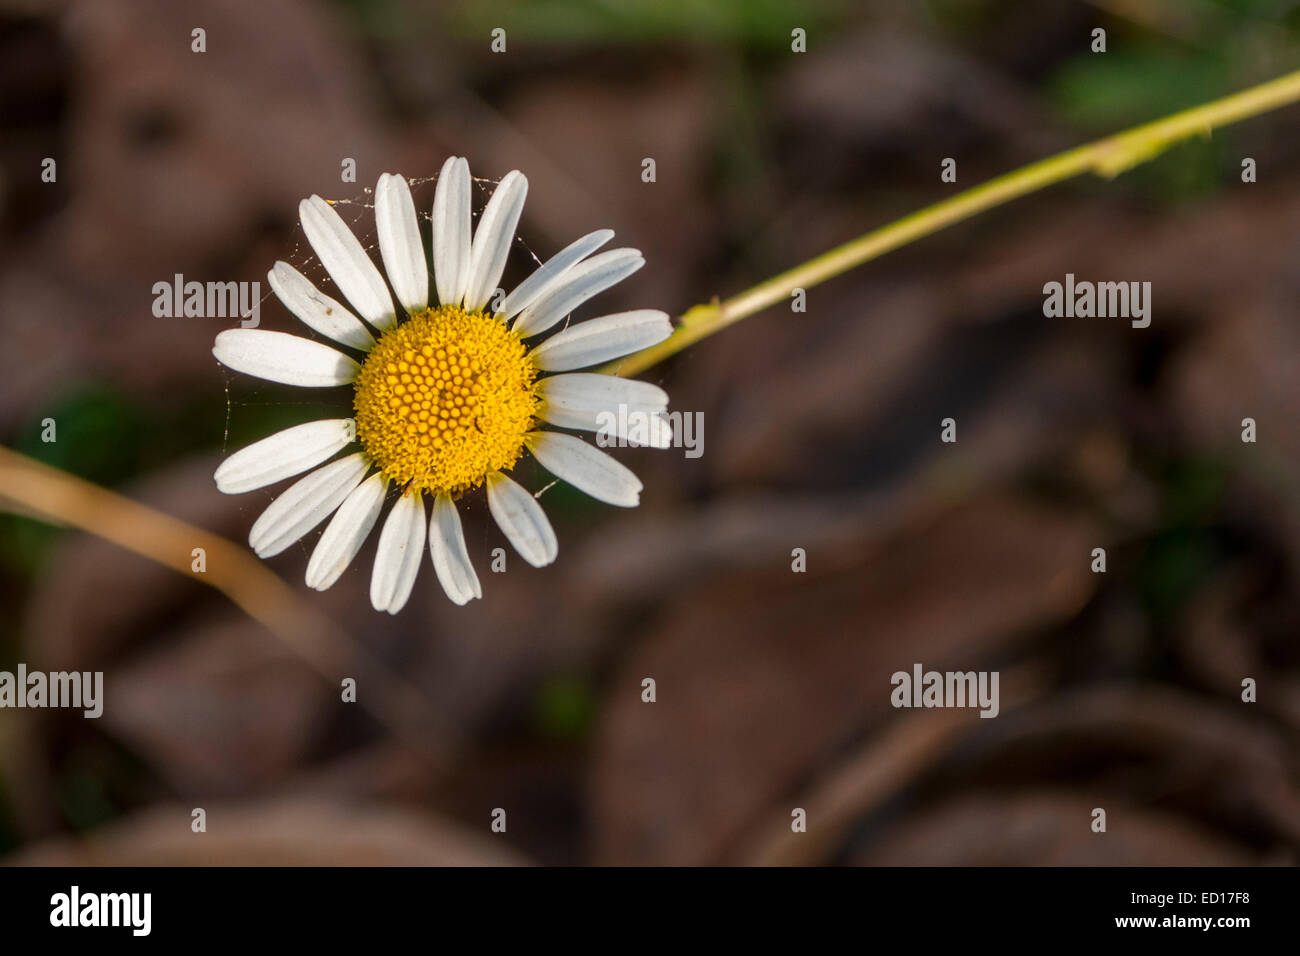 closeup picture of a daisy taken in November Stock Photo